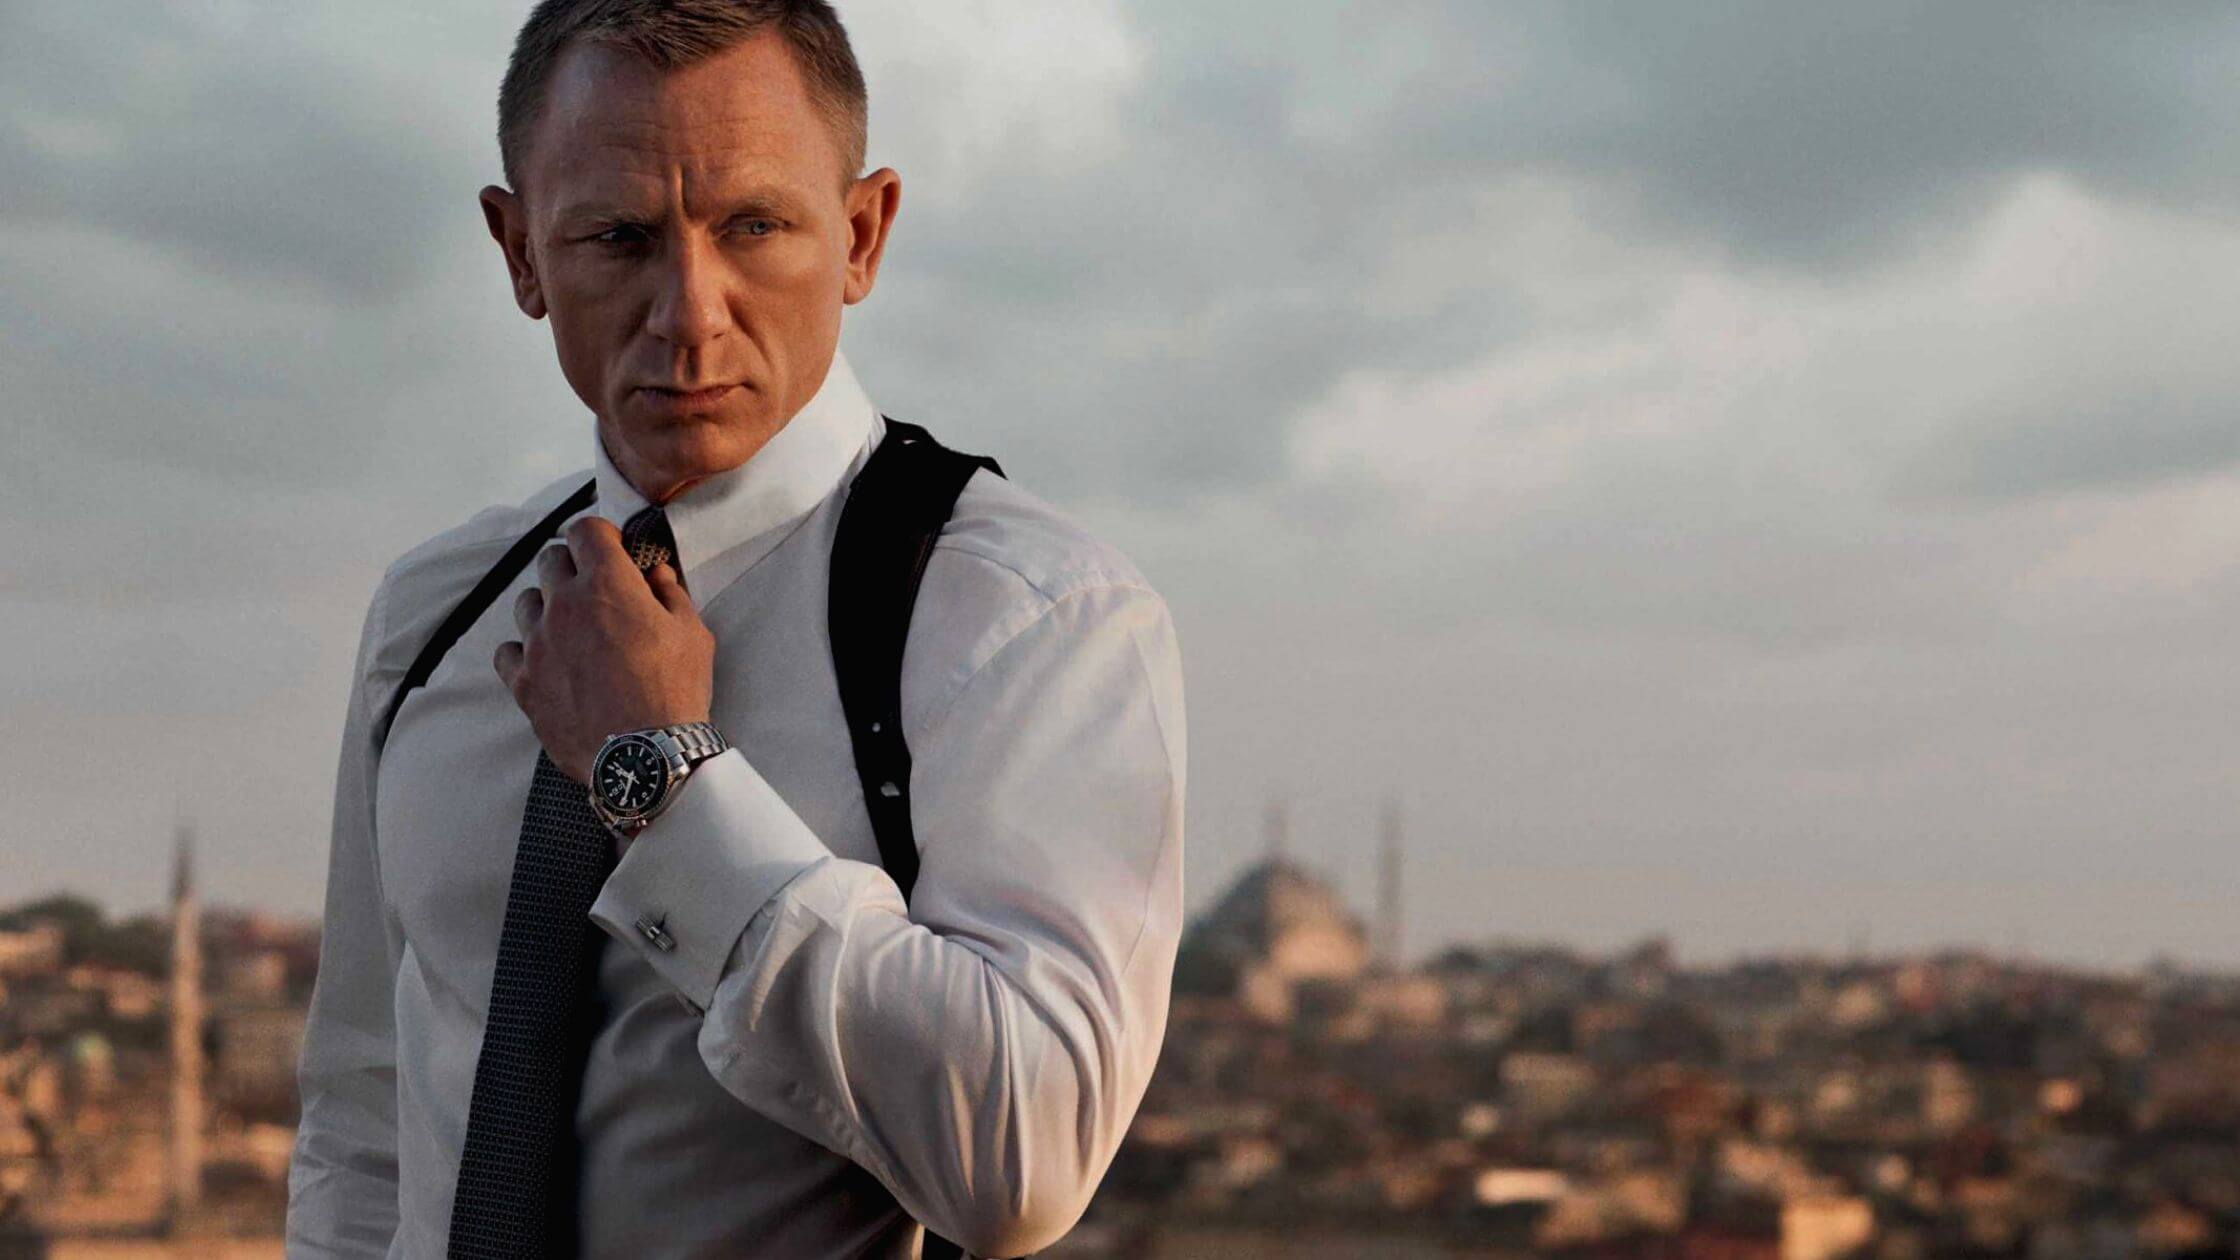 James Bond Is Being Reinvented! Before The Next 007 Film